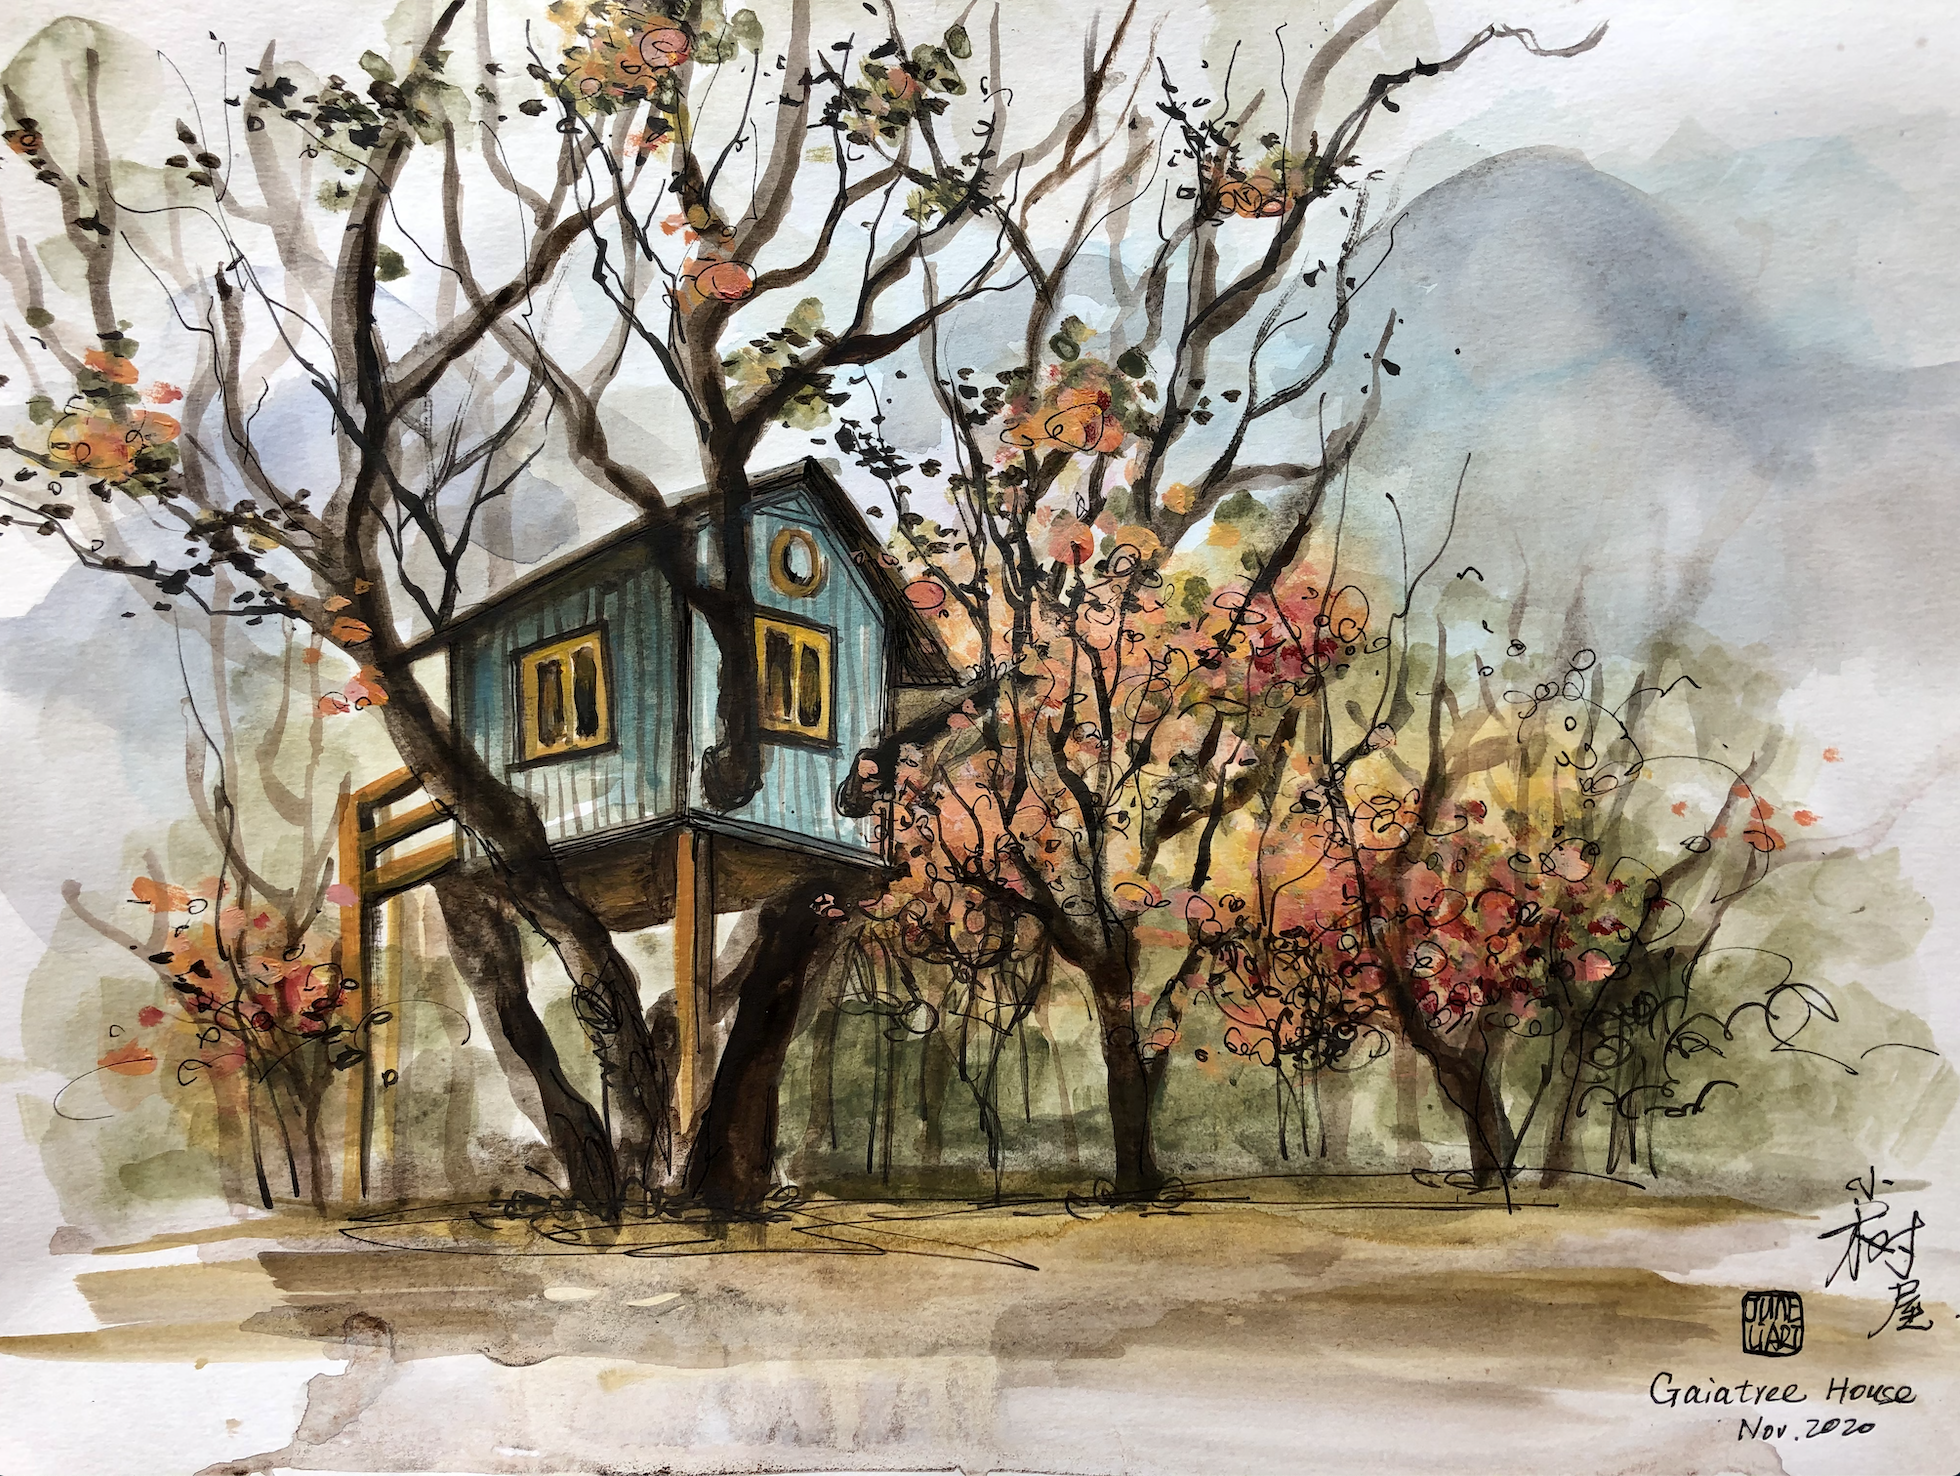 Tree House Angel's camp CA, Watercolor on paper, 2021 (Copy)